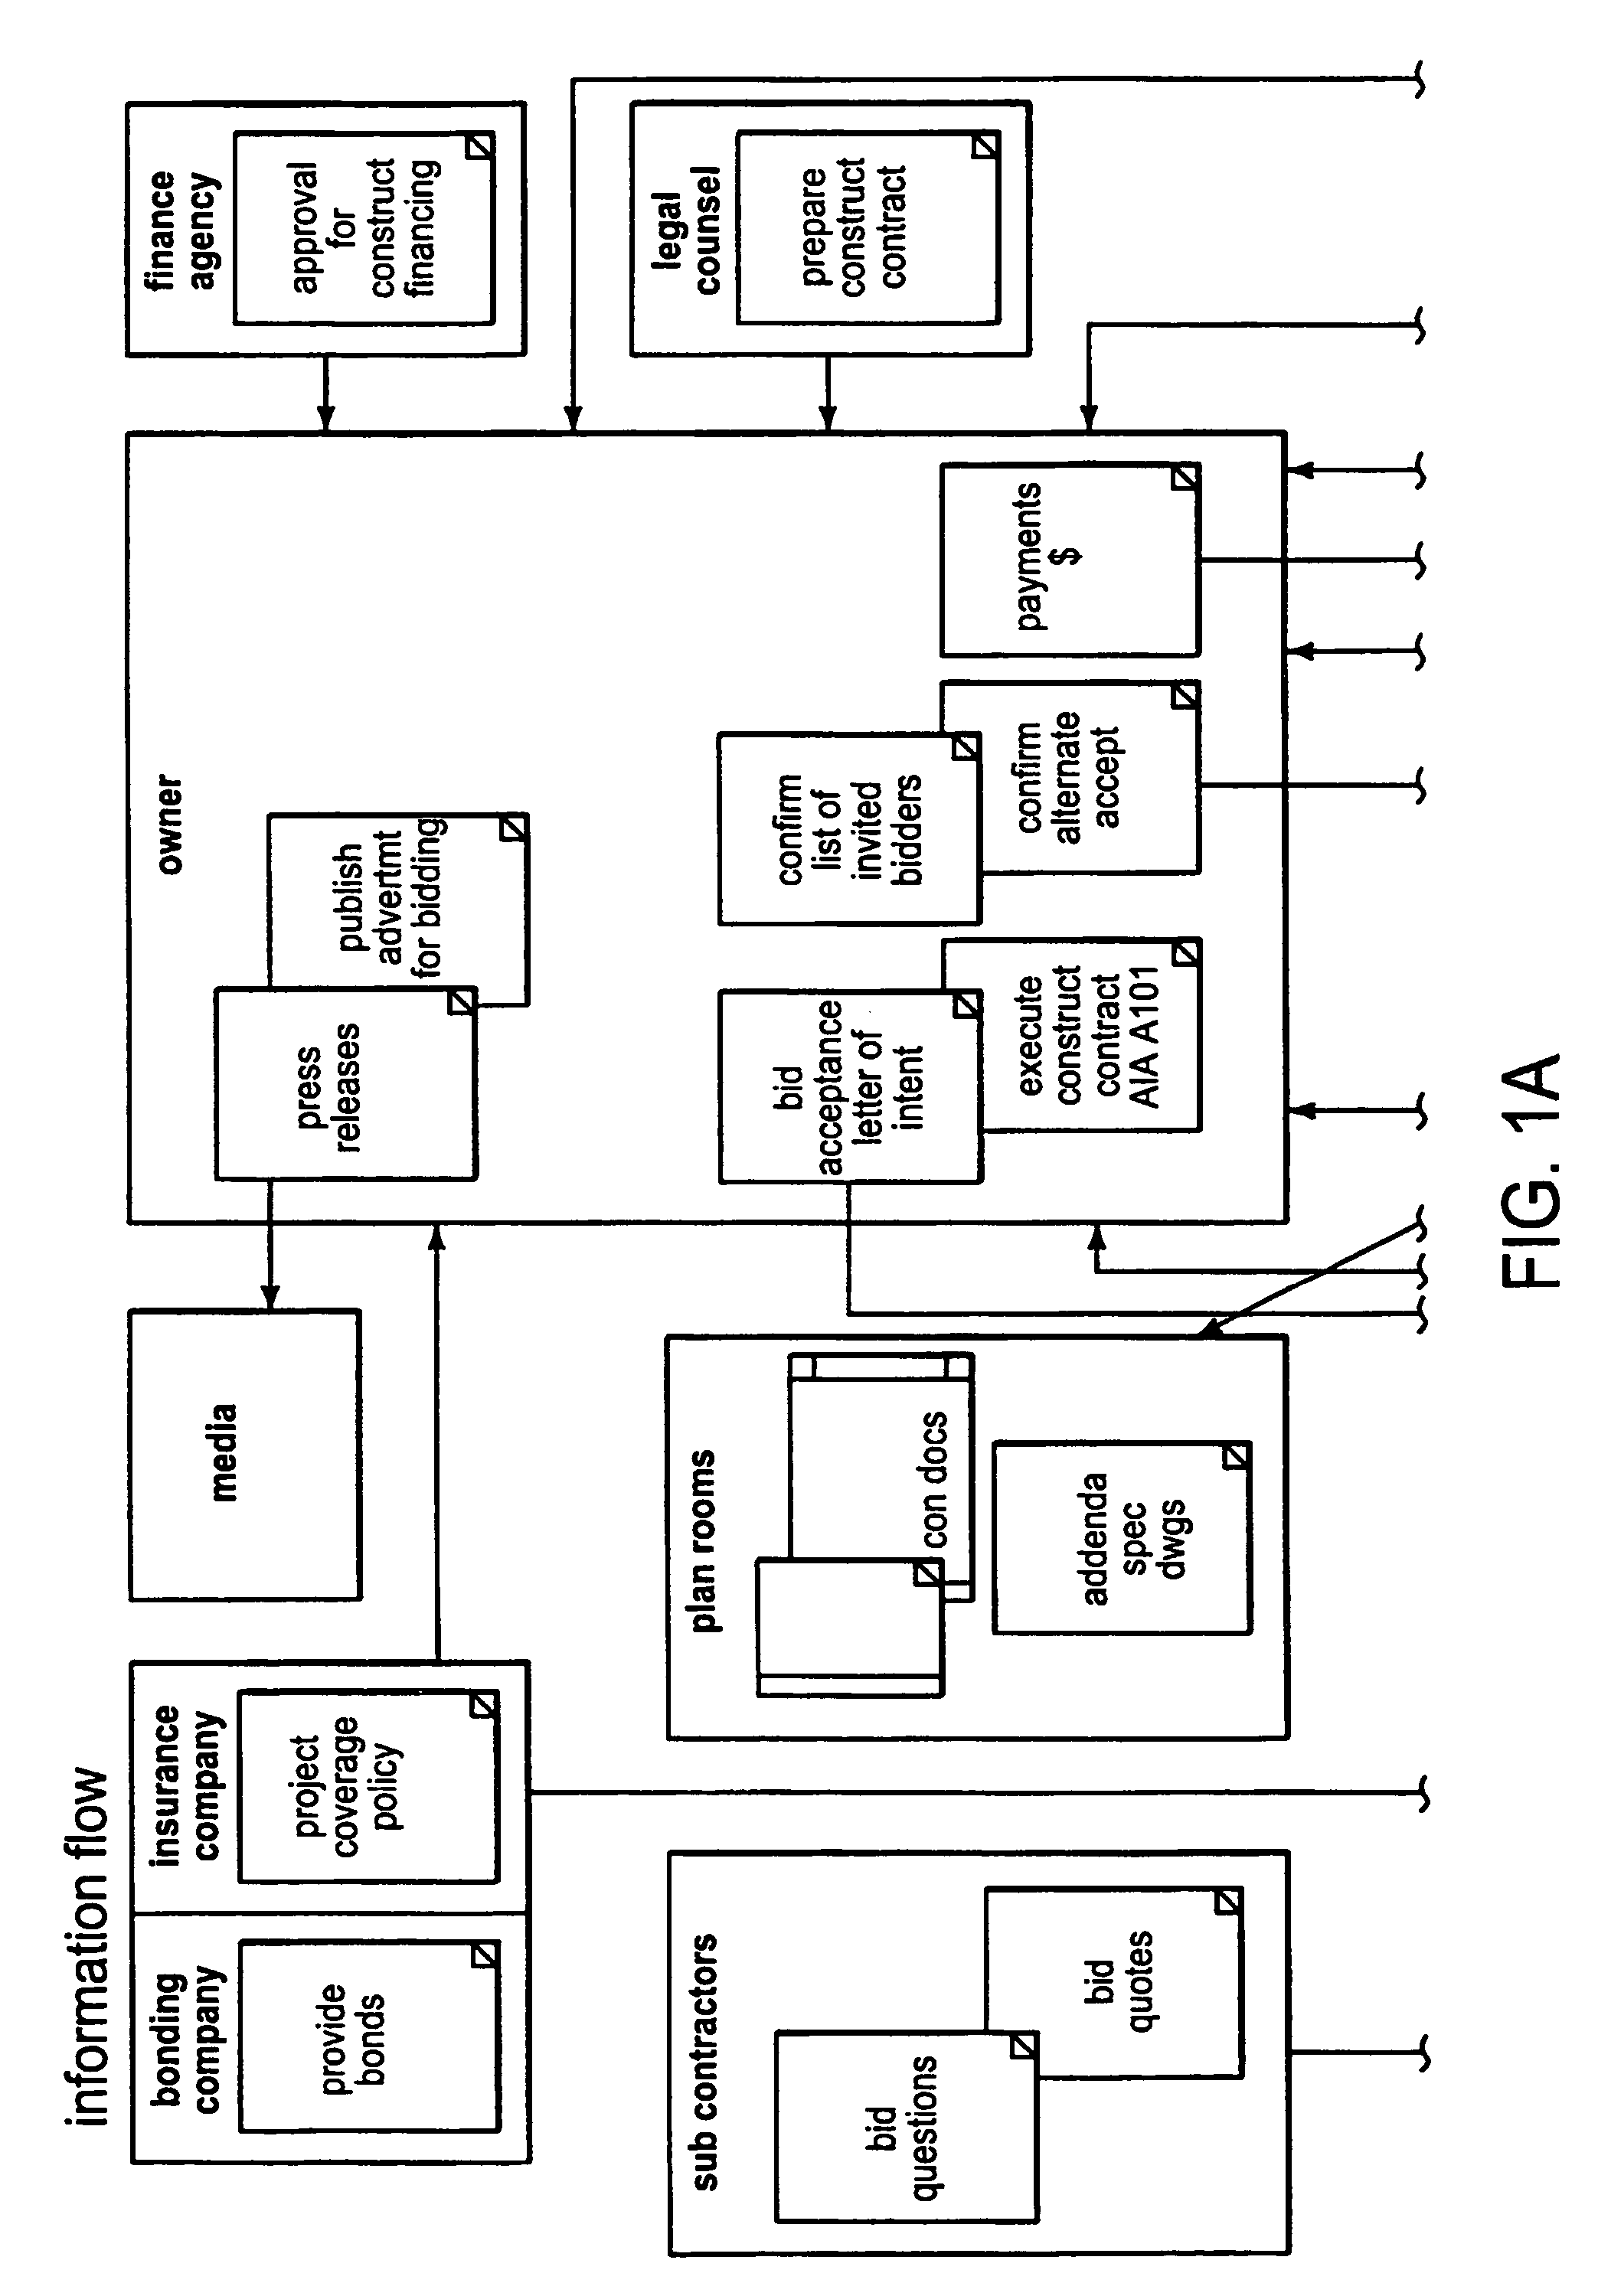 Method and apparatus for providing access to and working with architectural drawings on the internet